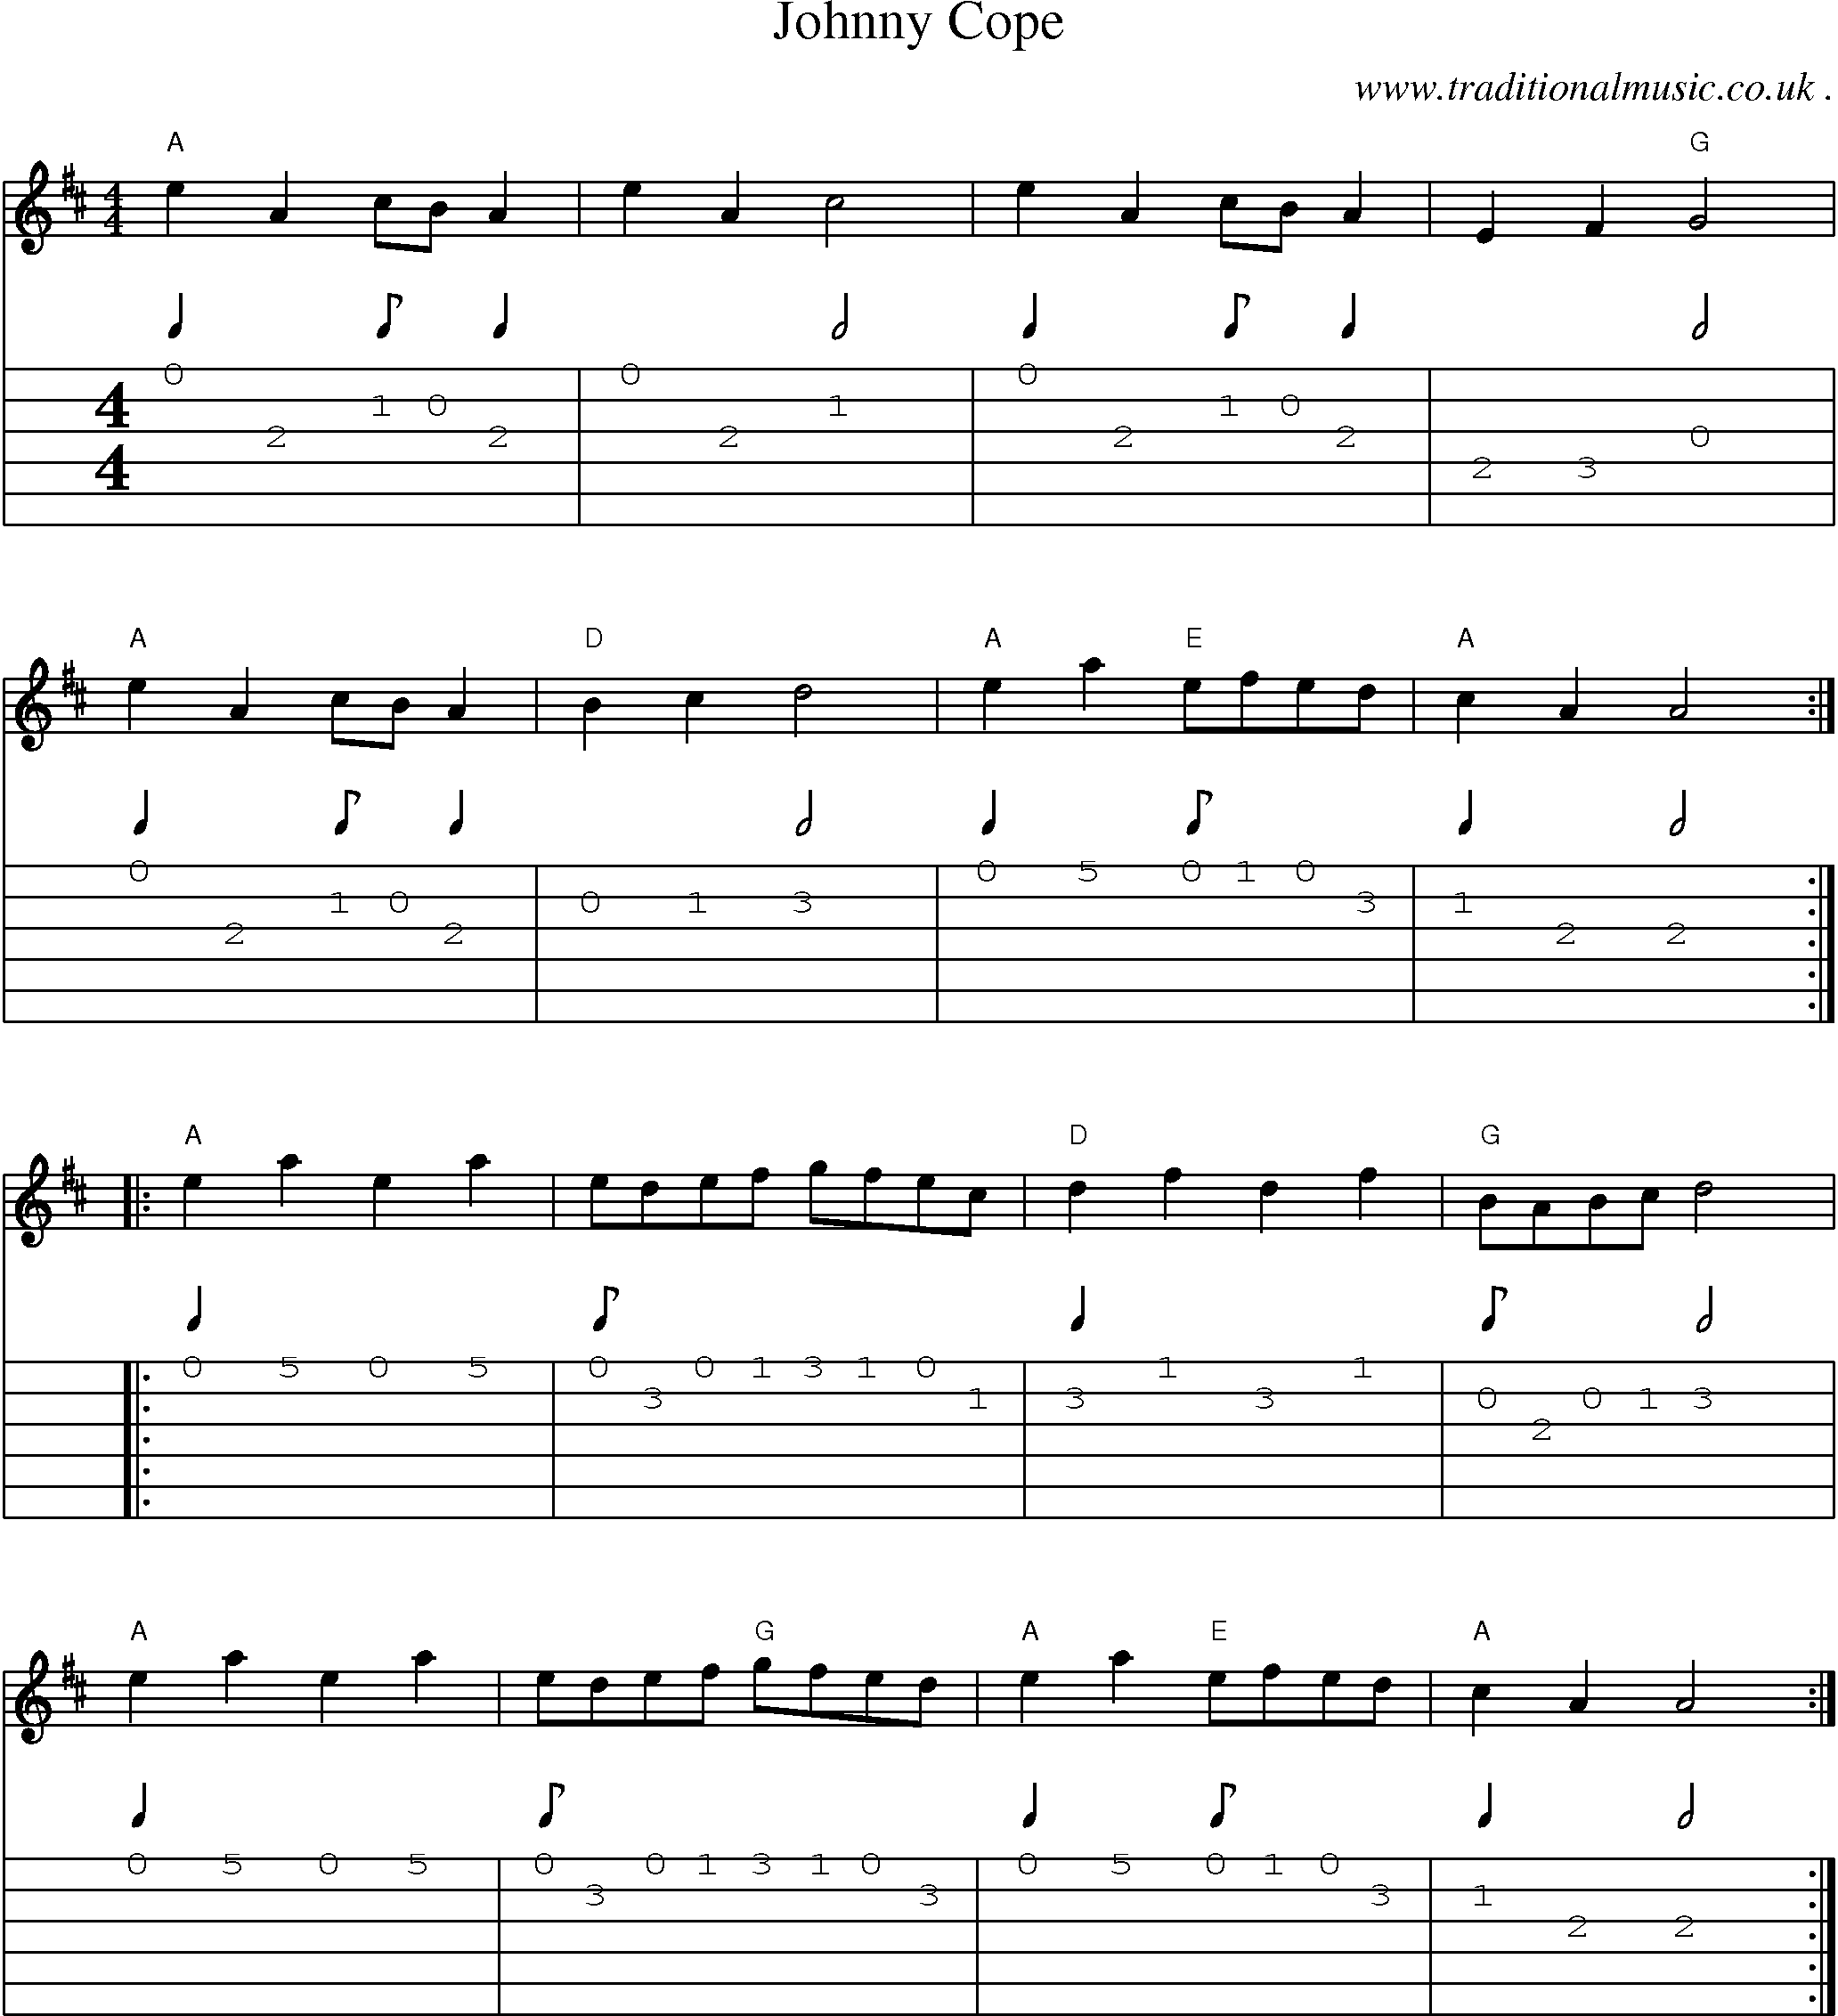 Music Score and Guitar Tabs for Johnny Cope